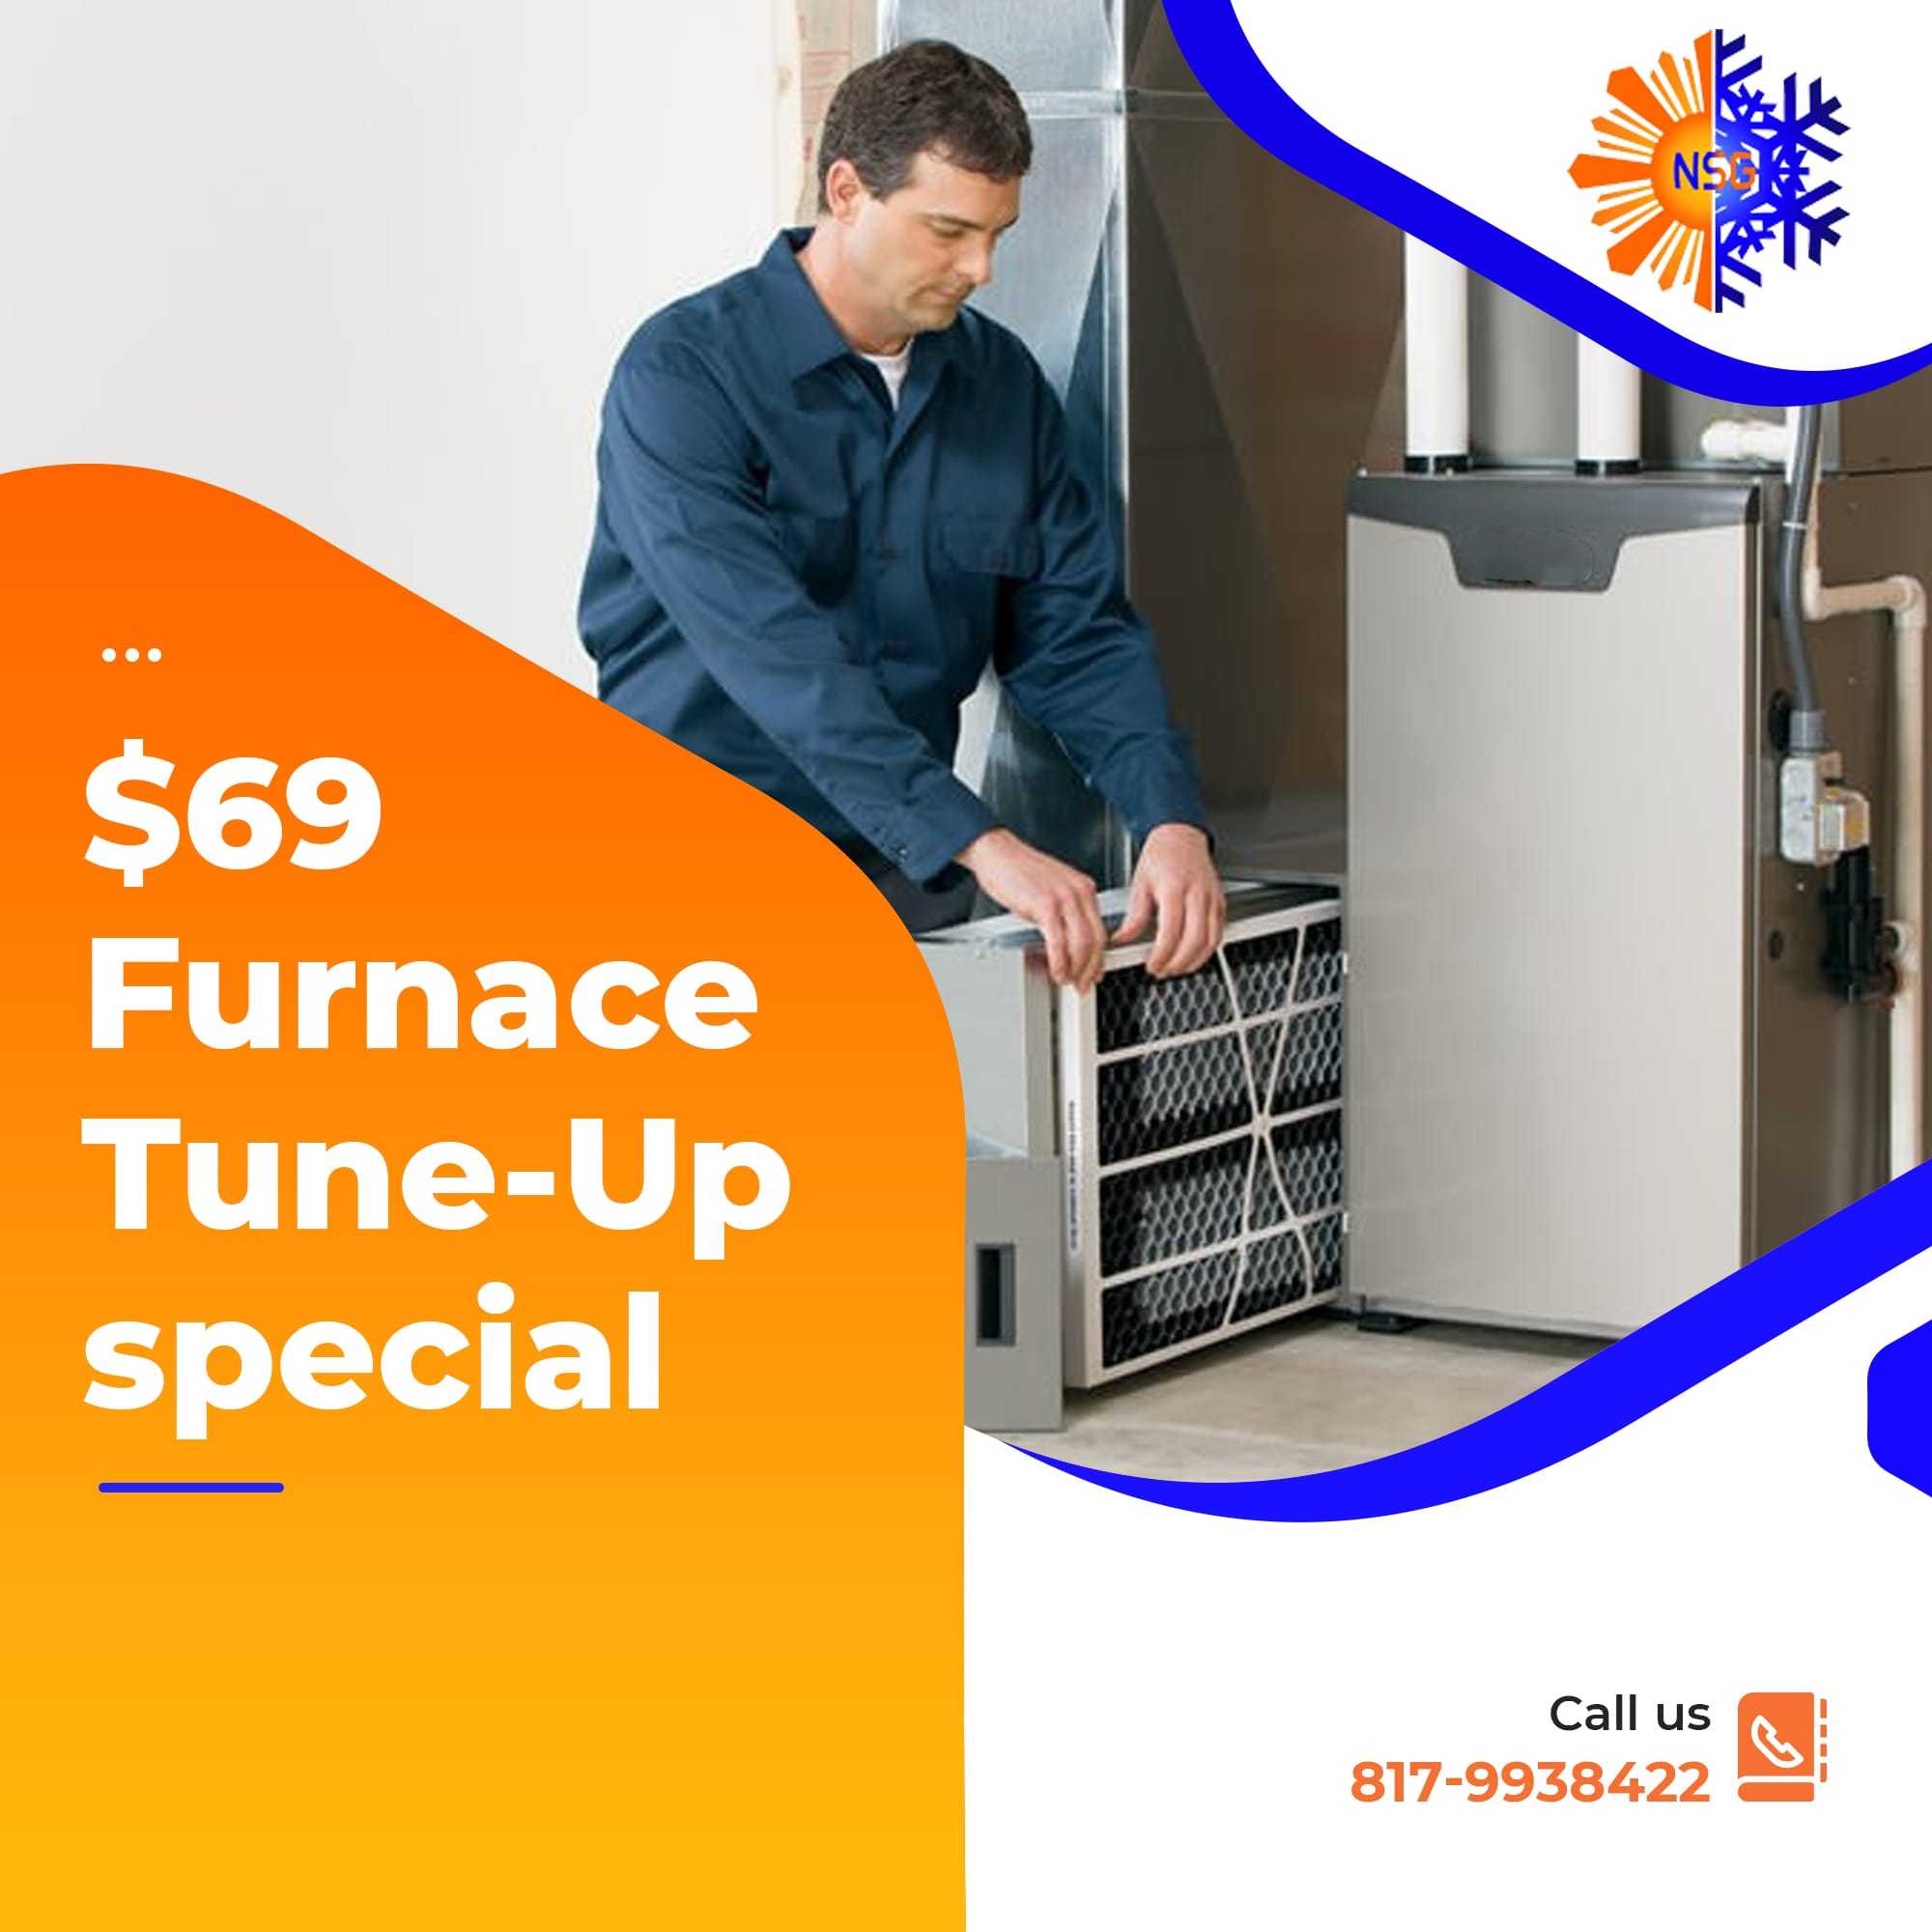 $69 Furnace Tune-Up special